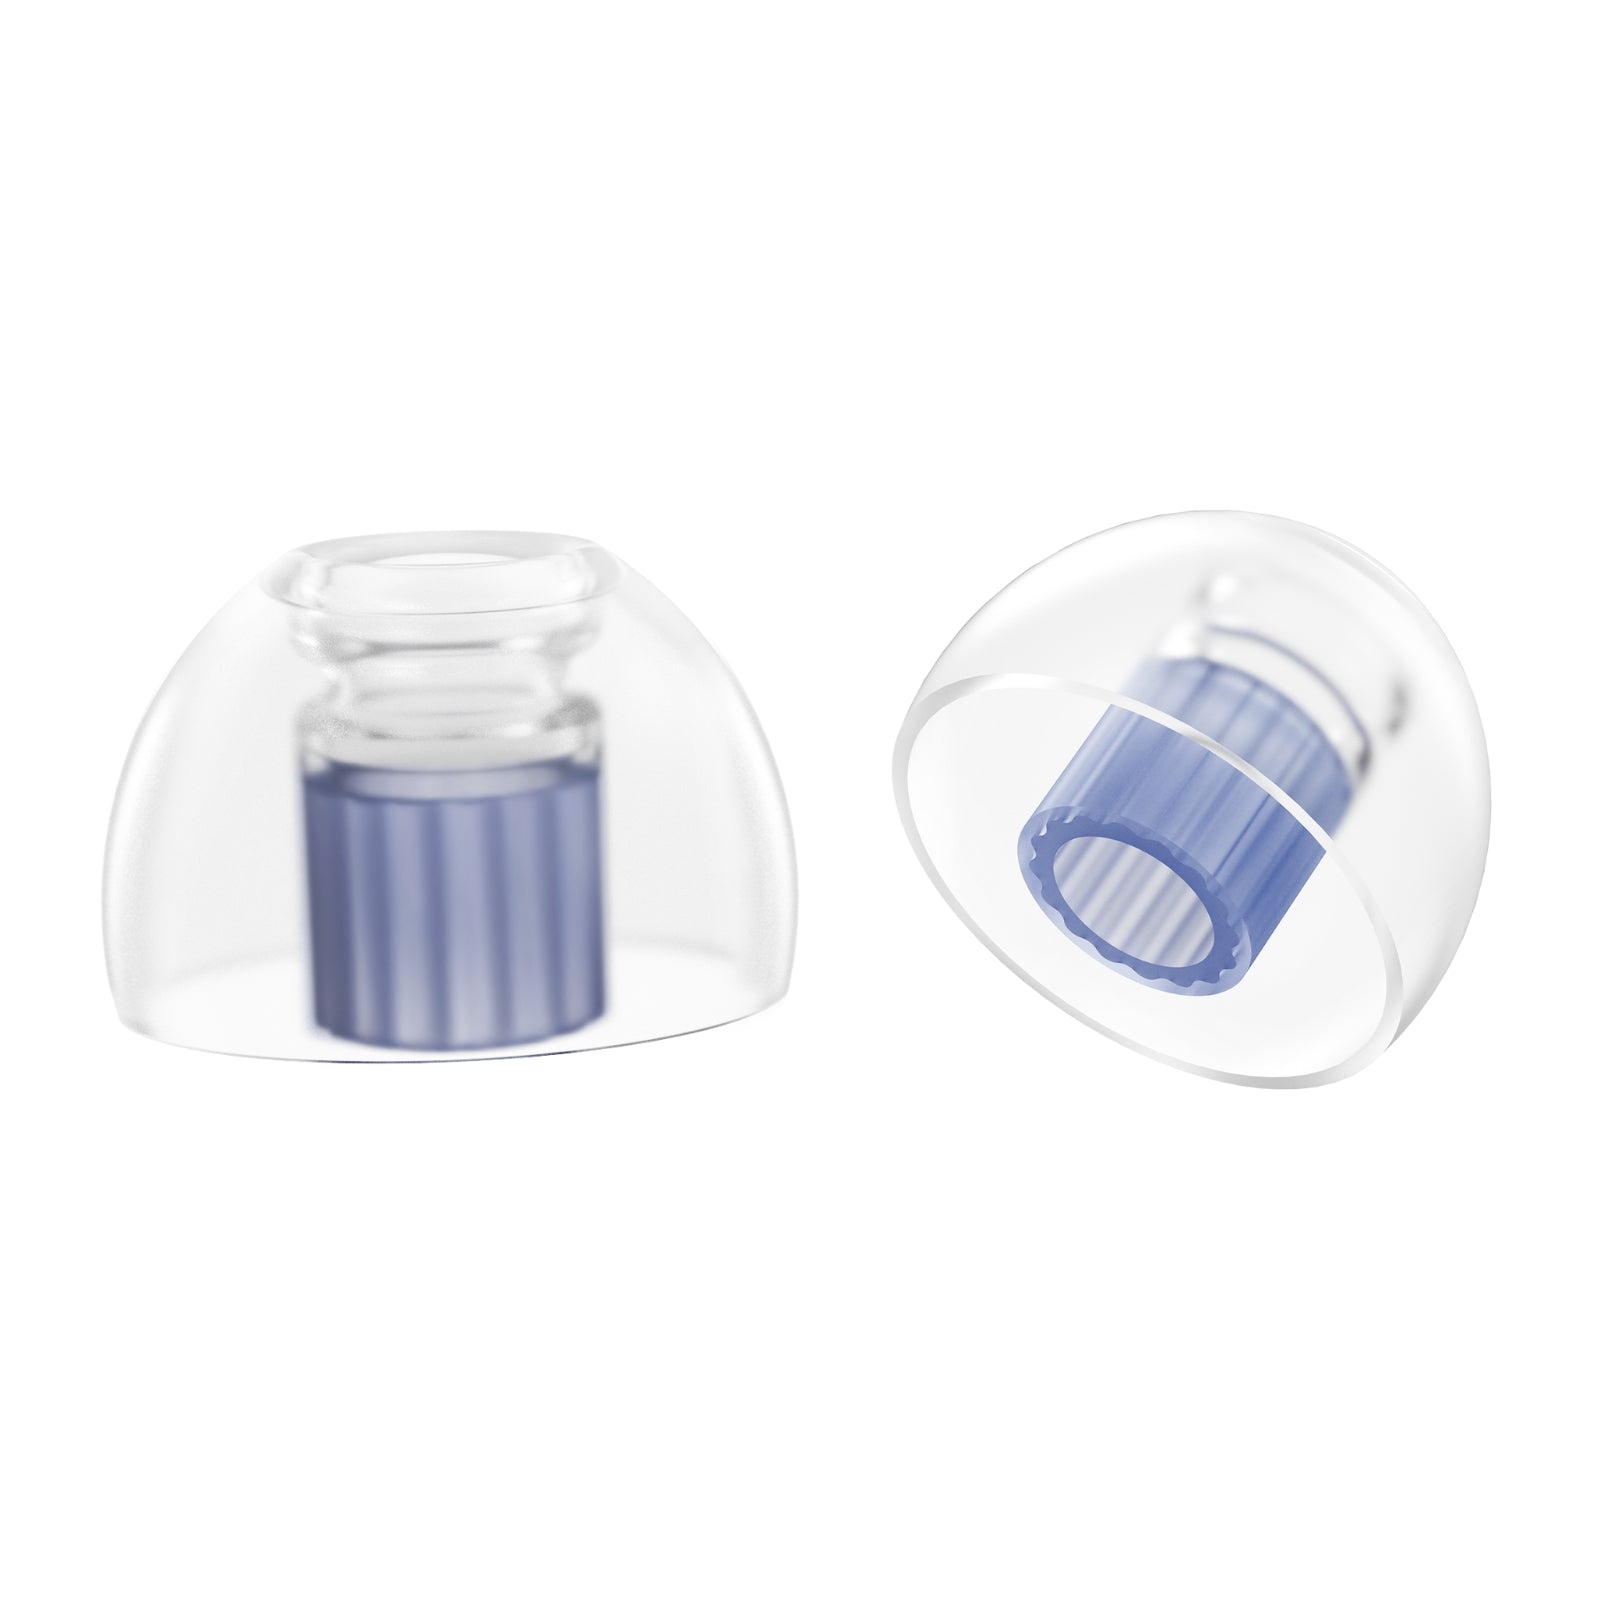 SpinFit W1 Silicone Eartips For IEM